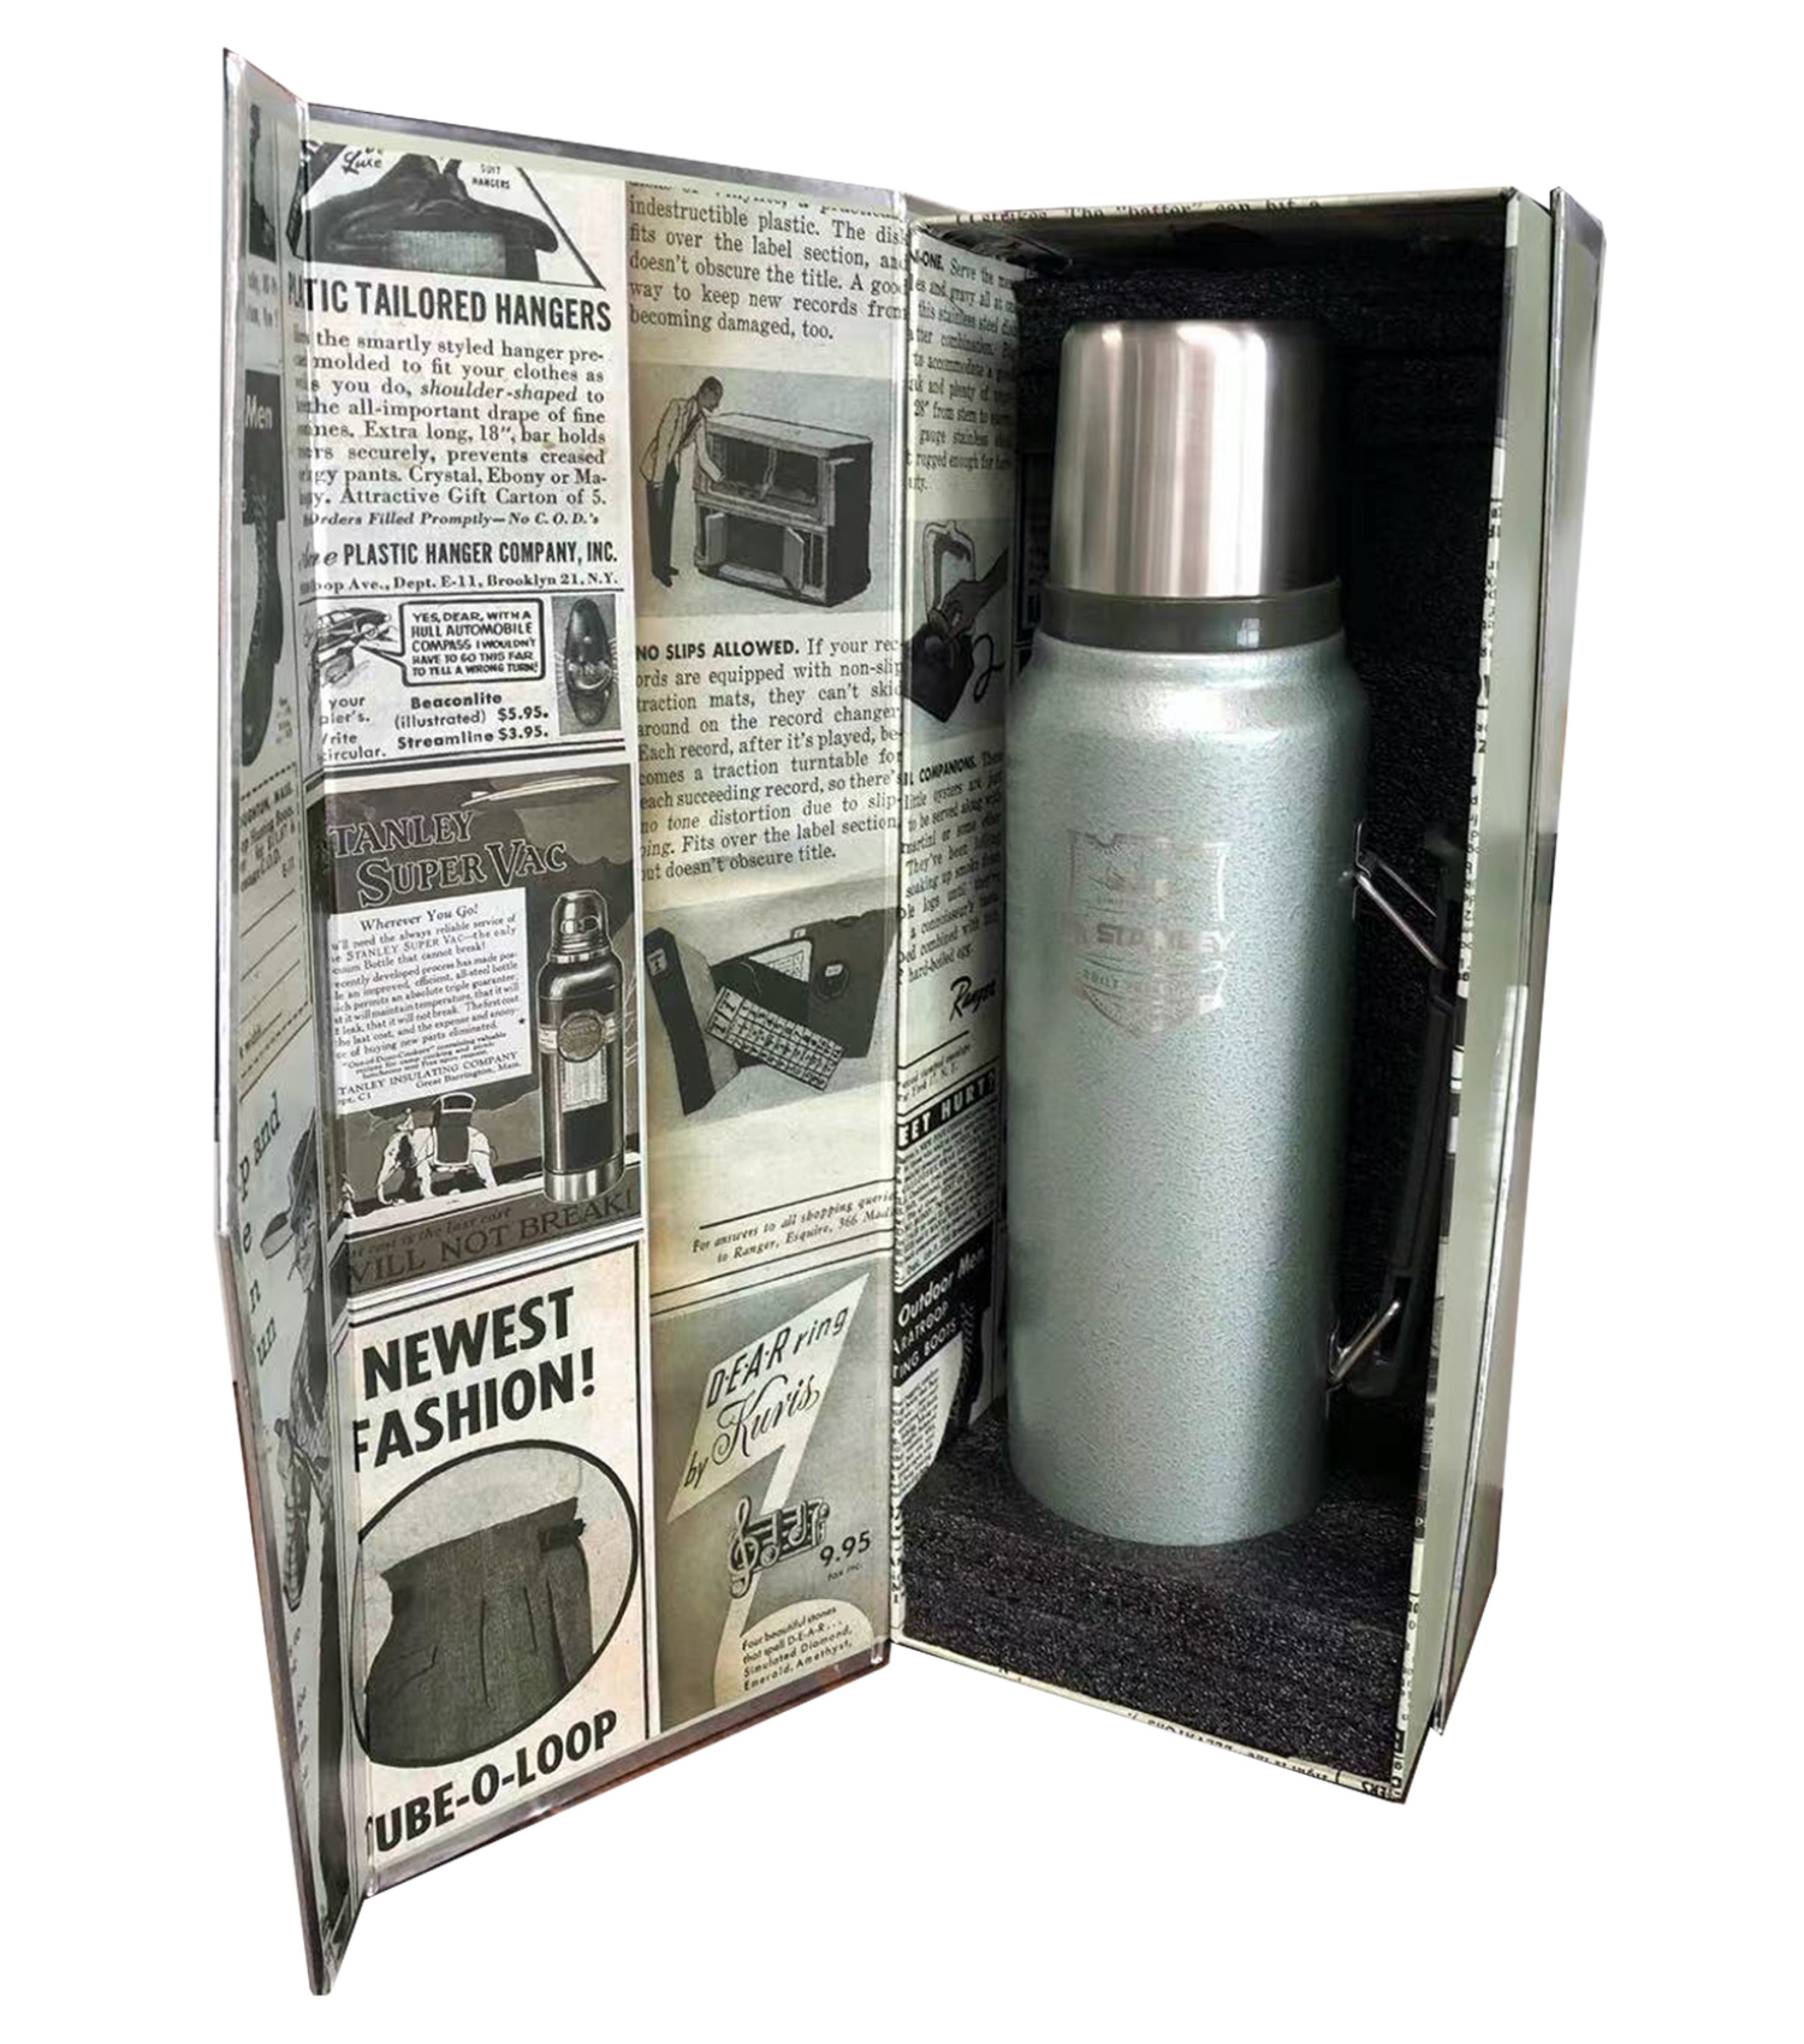 [STANLEY] Stanley Classic 1 L thermos + 236 ml flask gift set Camping  Outdoor